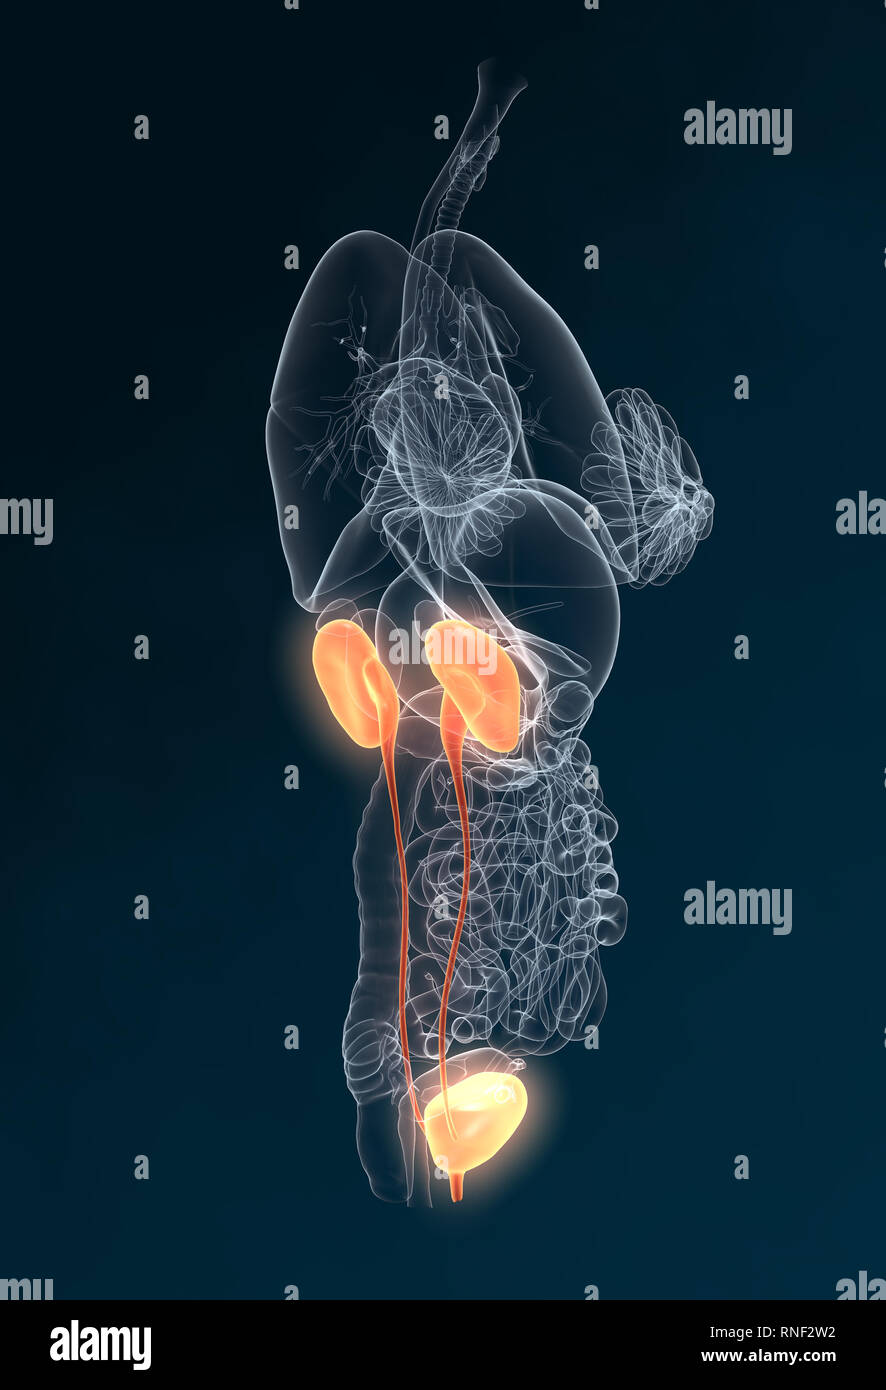 ureter, renal calculi, kidney stone, urinary system of a woman with kidney, adrenal gland, artery, veins, ureter, urinary bladder, illustration, 3D, f Stock Photo